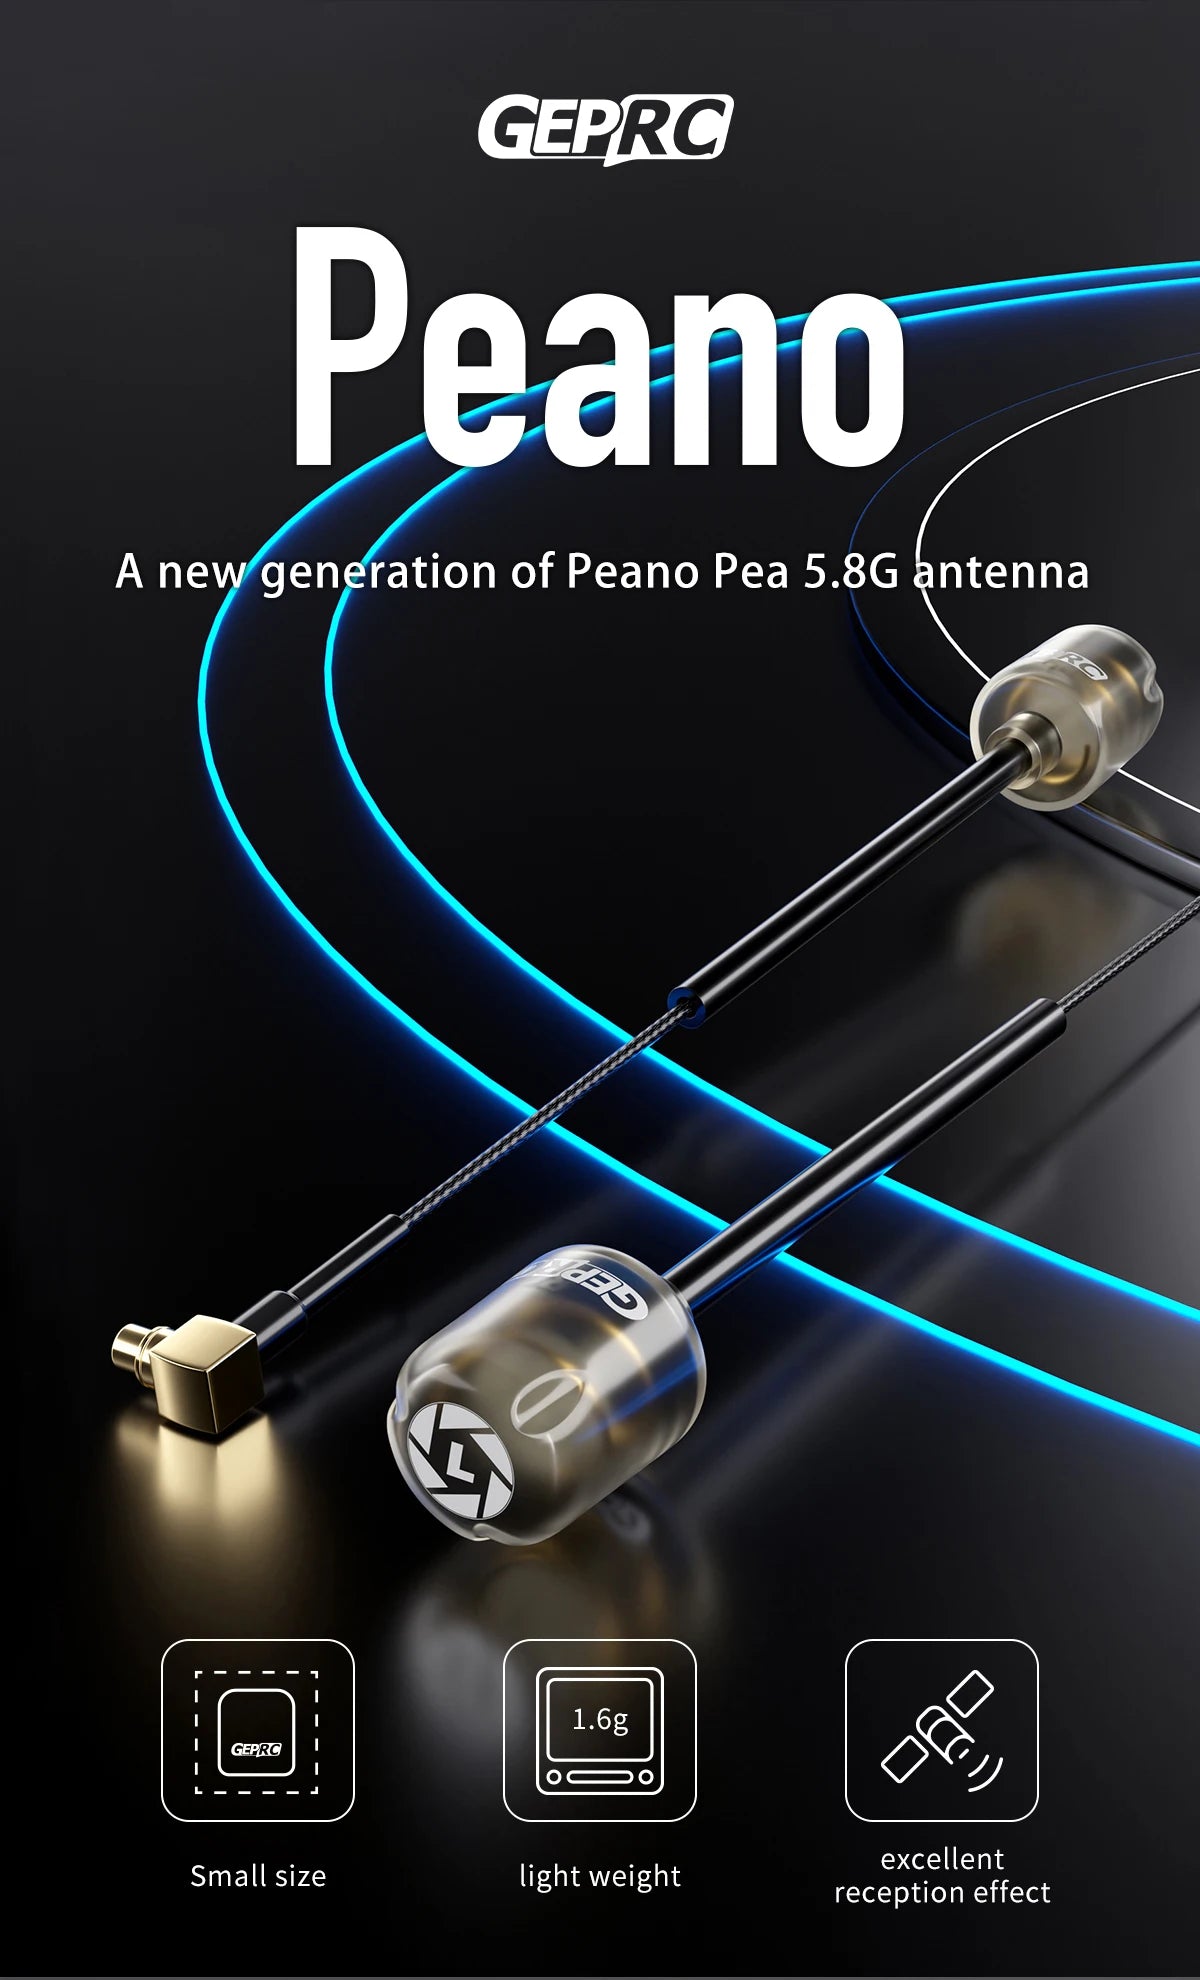 Peano Pea 5.8G antenna 1.6g GEPRC excellent Small size light